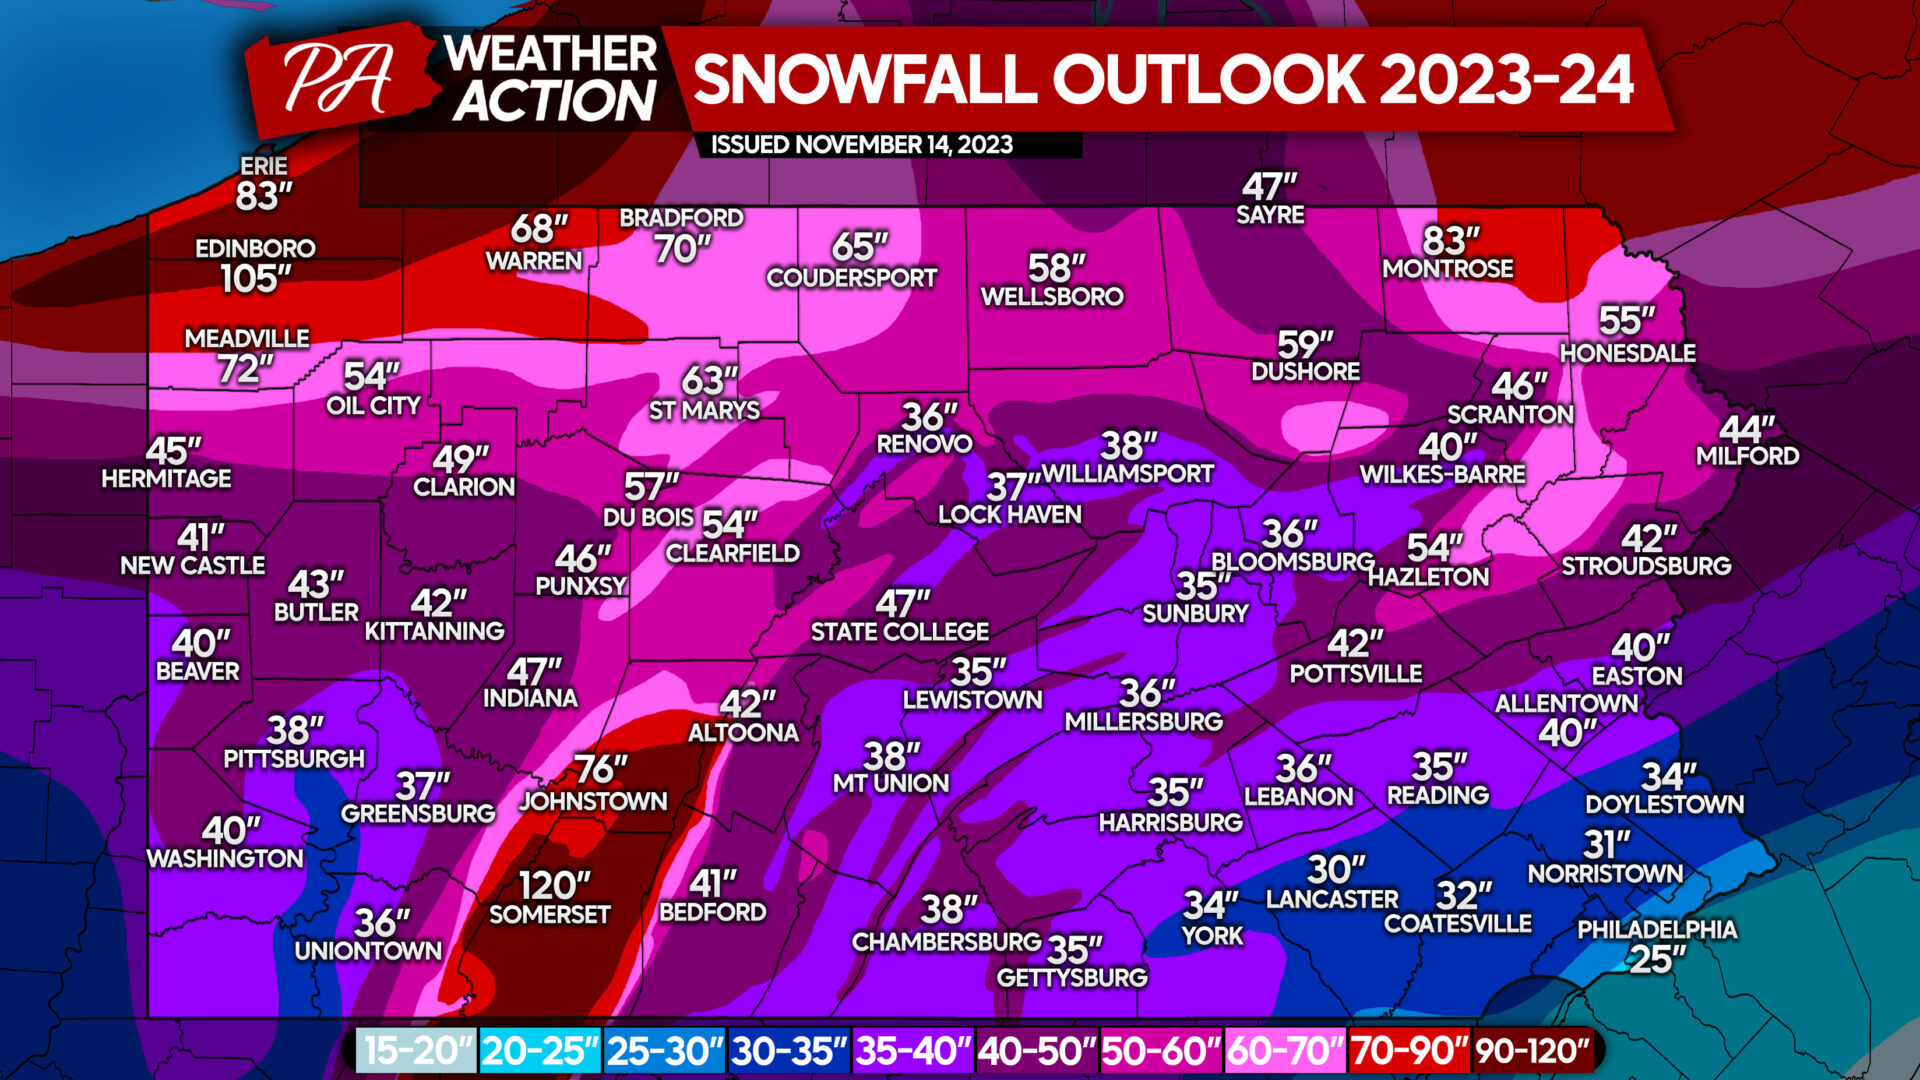 2023 – 2024 Winter Outlook for Pennsylvania: Hope for Snow Lovers in Much of the State